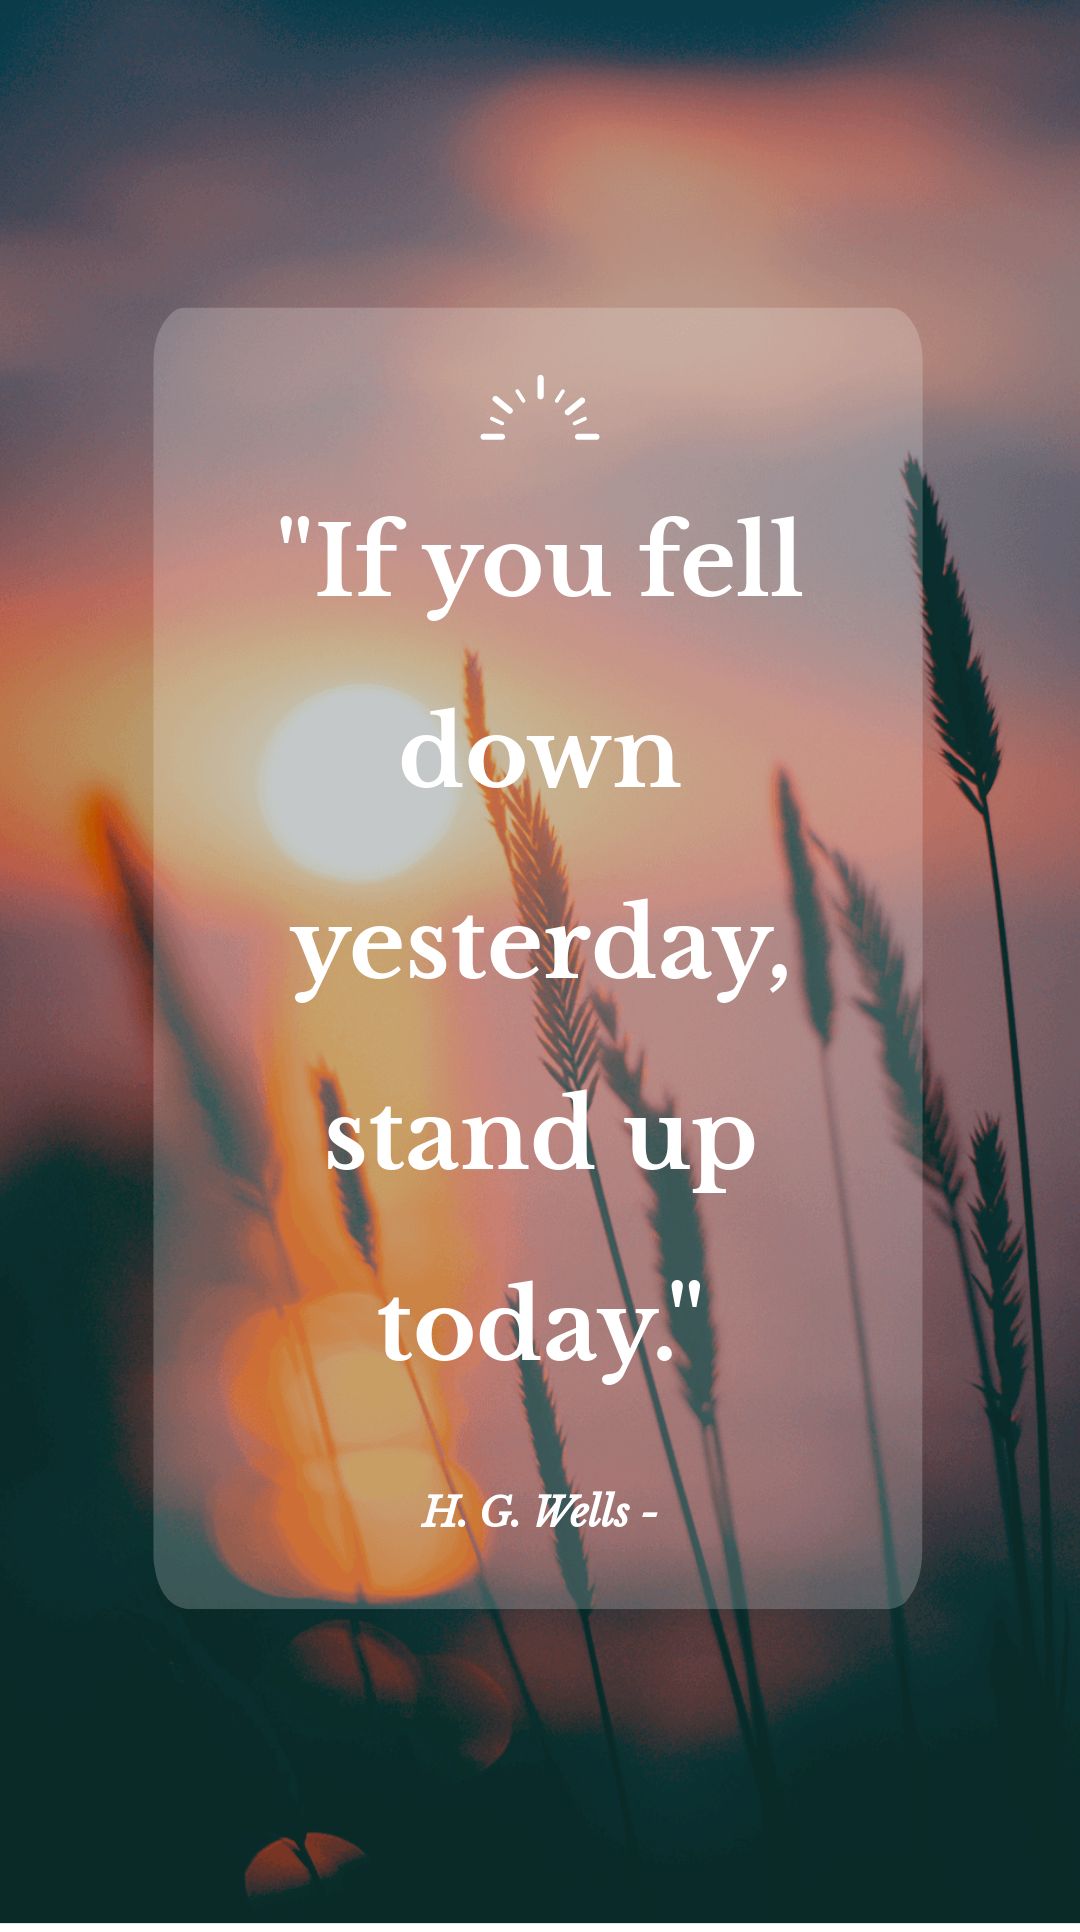 H. G. Wells - If you fell down yesterday, stand up today.